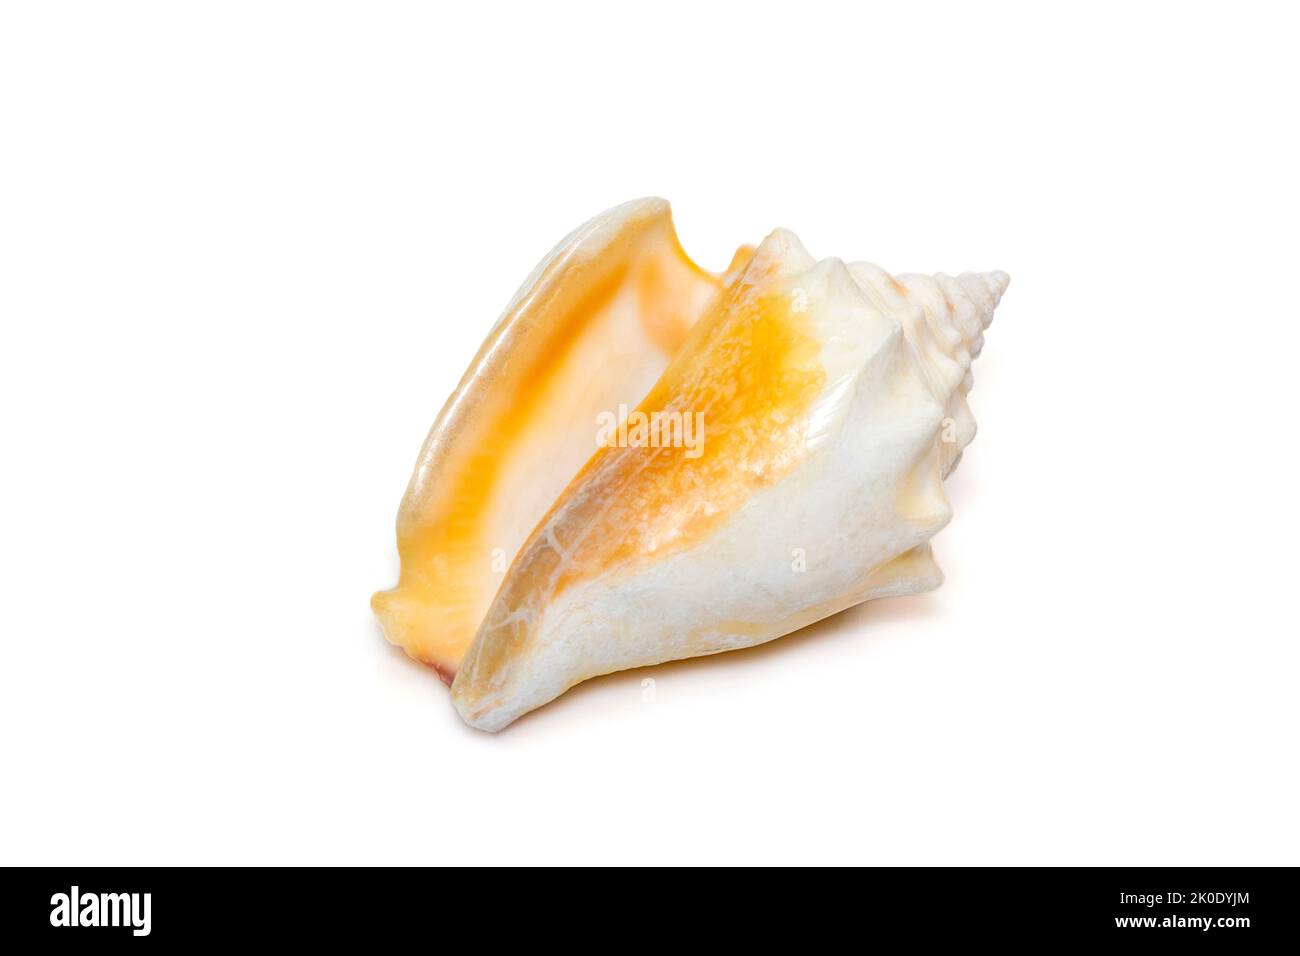 Image of strombus alatus sea shell, the Florida fighting conch, is a species of medium-sized, warm-water sea snail, a marine gastropod mollusk. Stock Photo